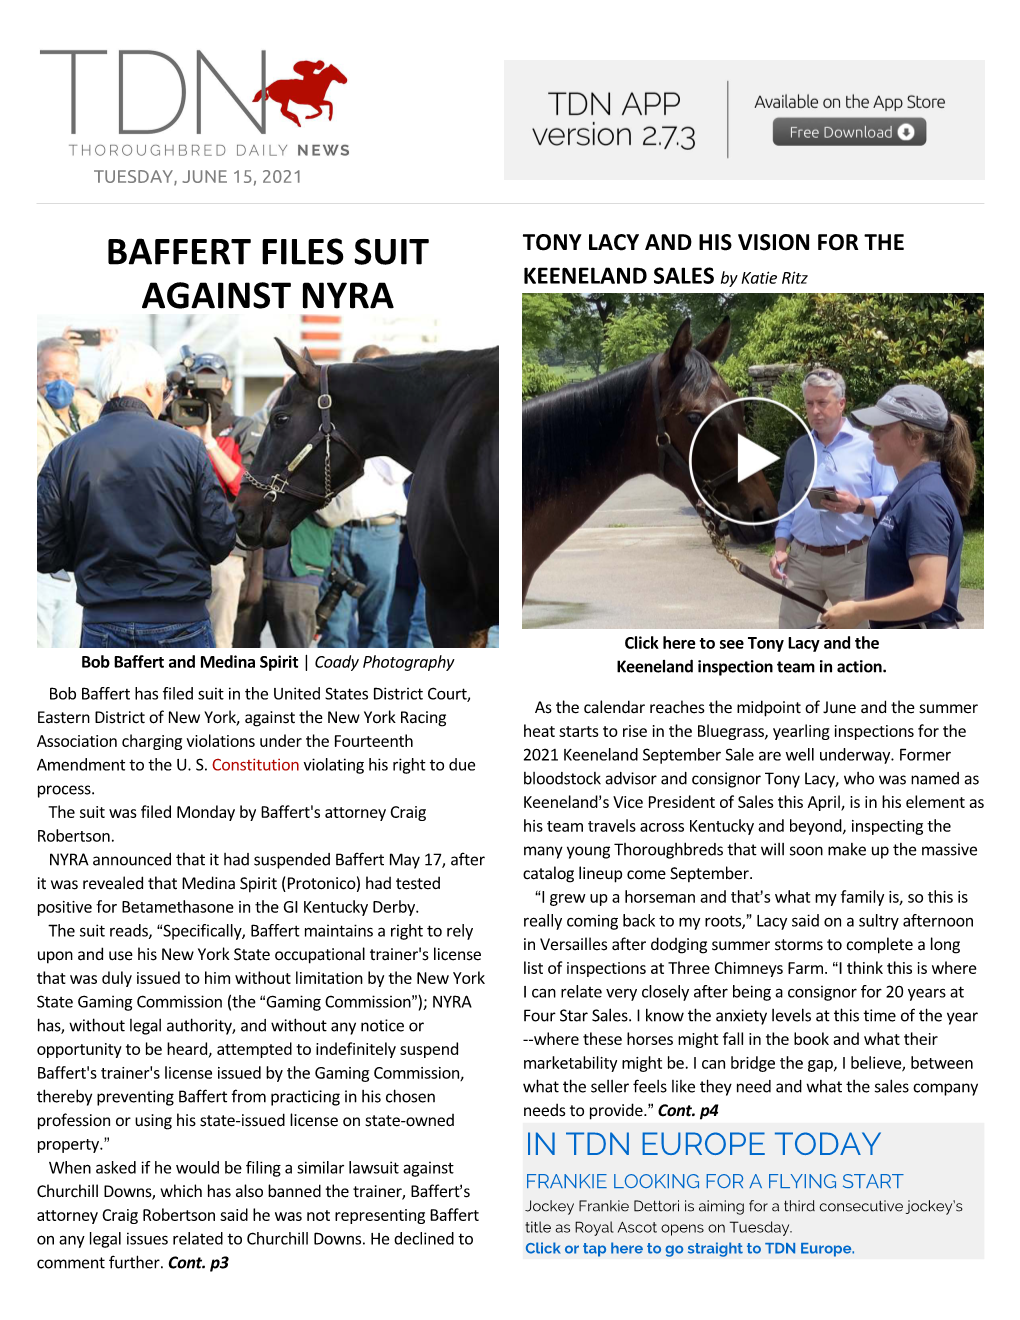 Baffert Files Suit Against NYRA (Cont